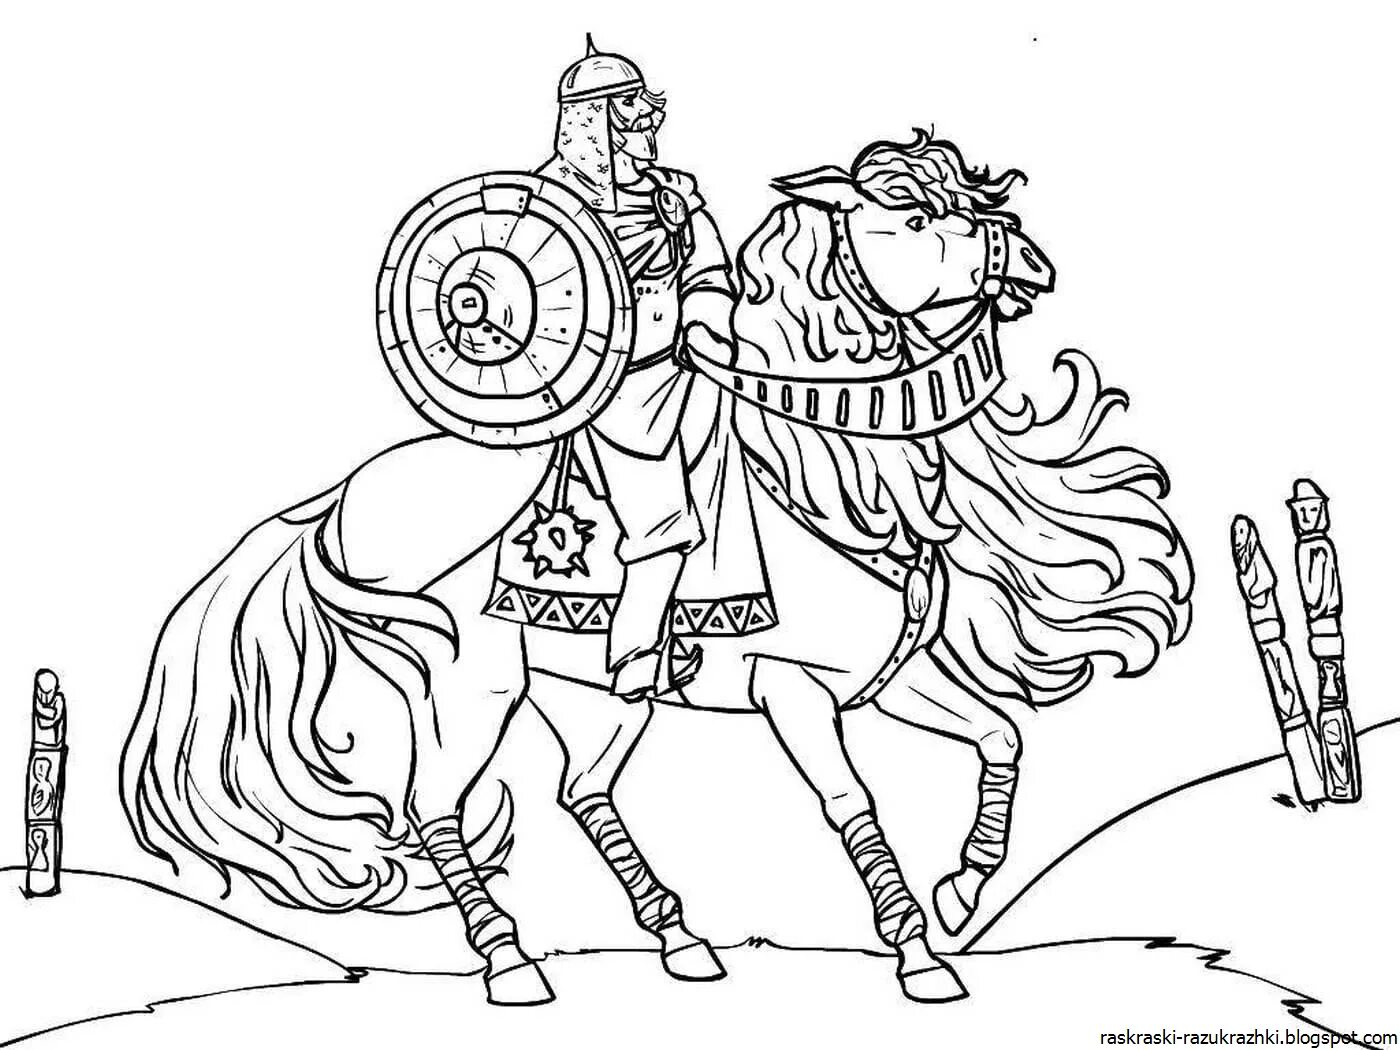 Coloring page richly decorated Vasnetsov's heroes